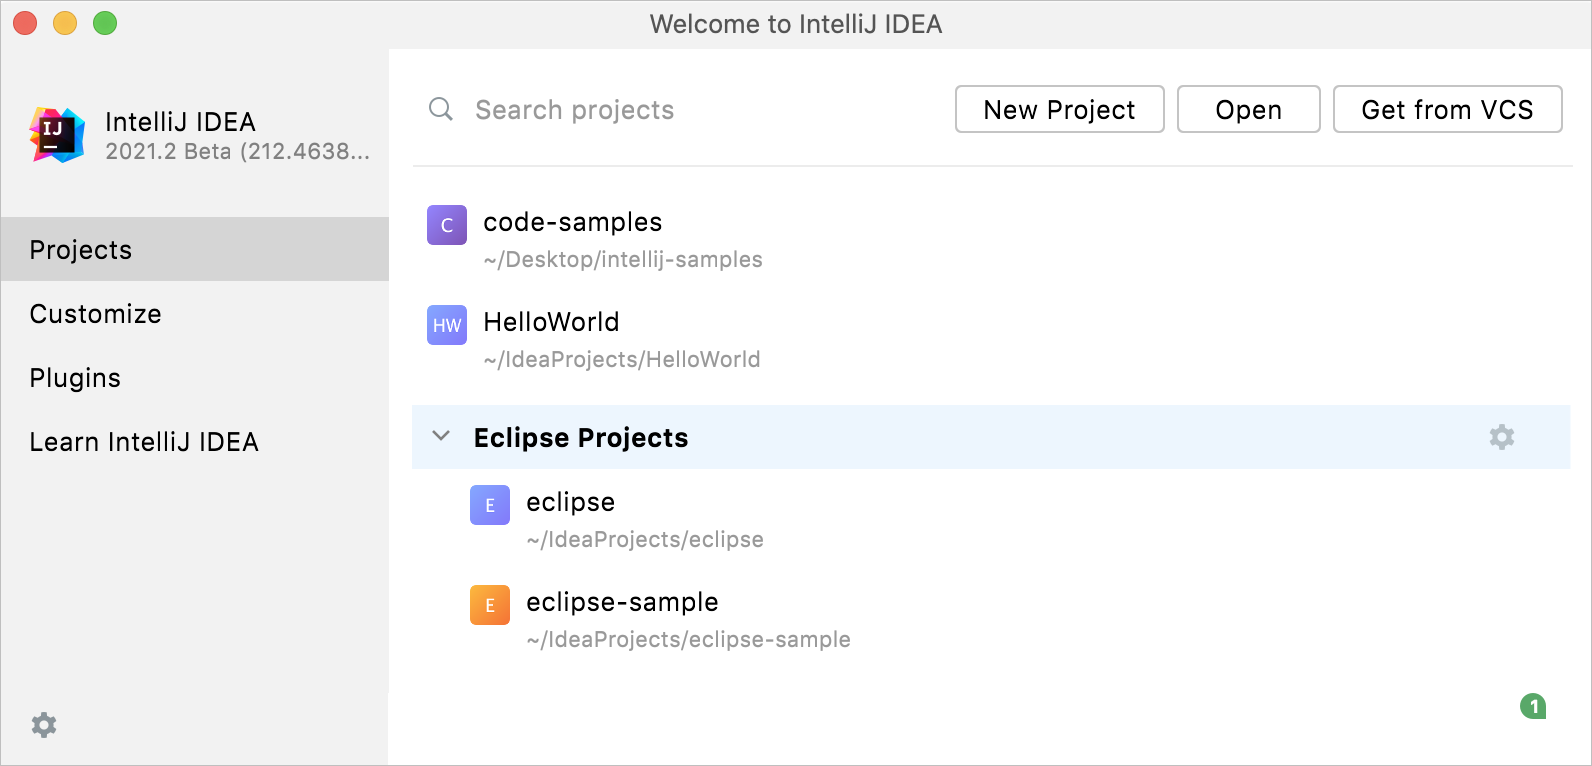 Opening an Eclipse project from the Welcome screen